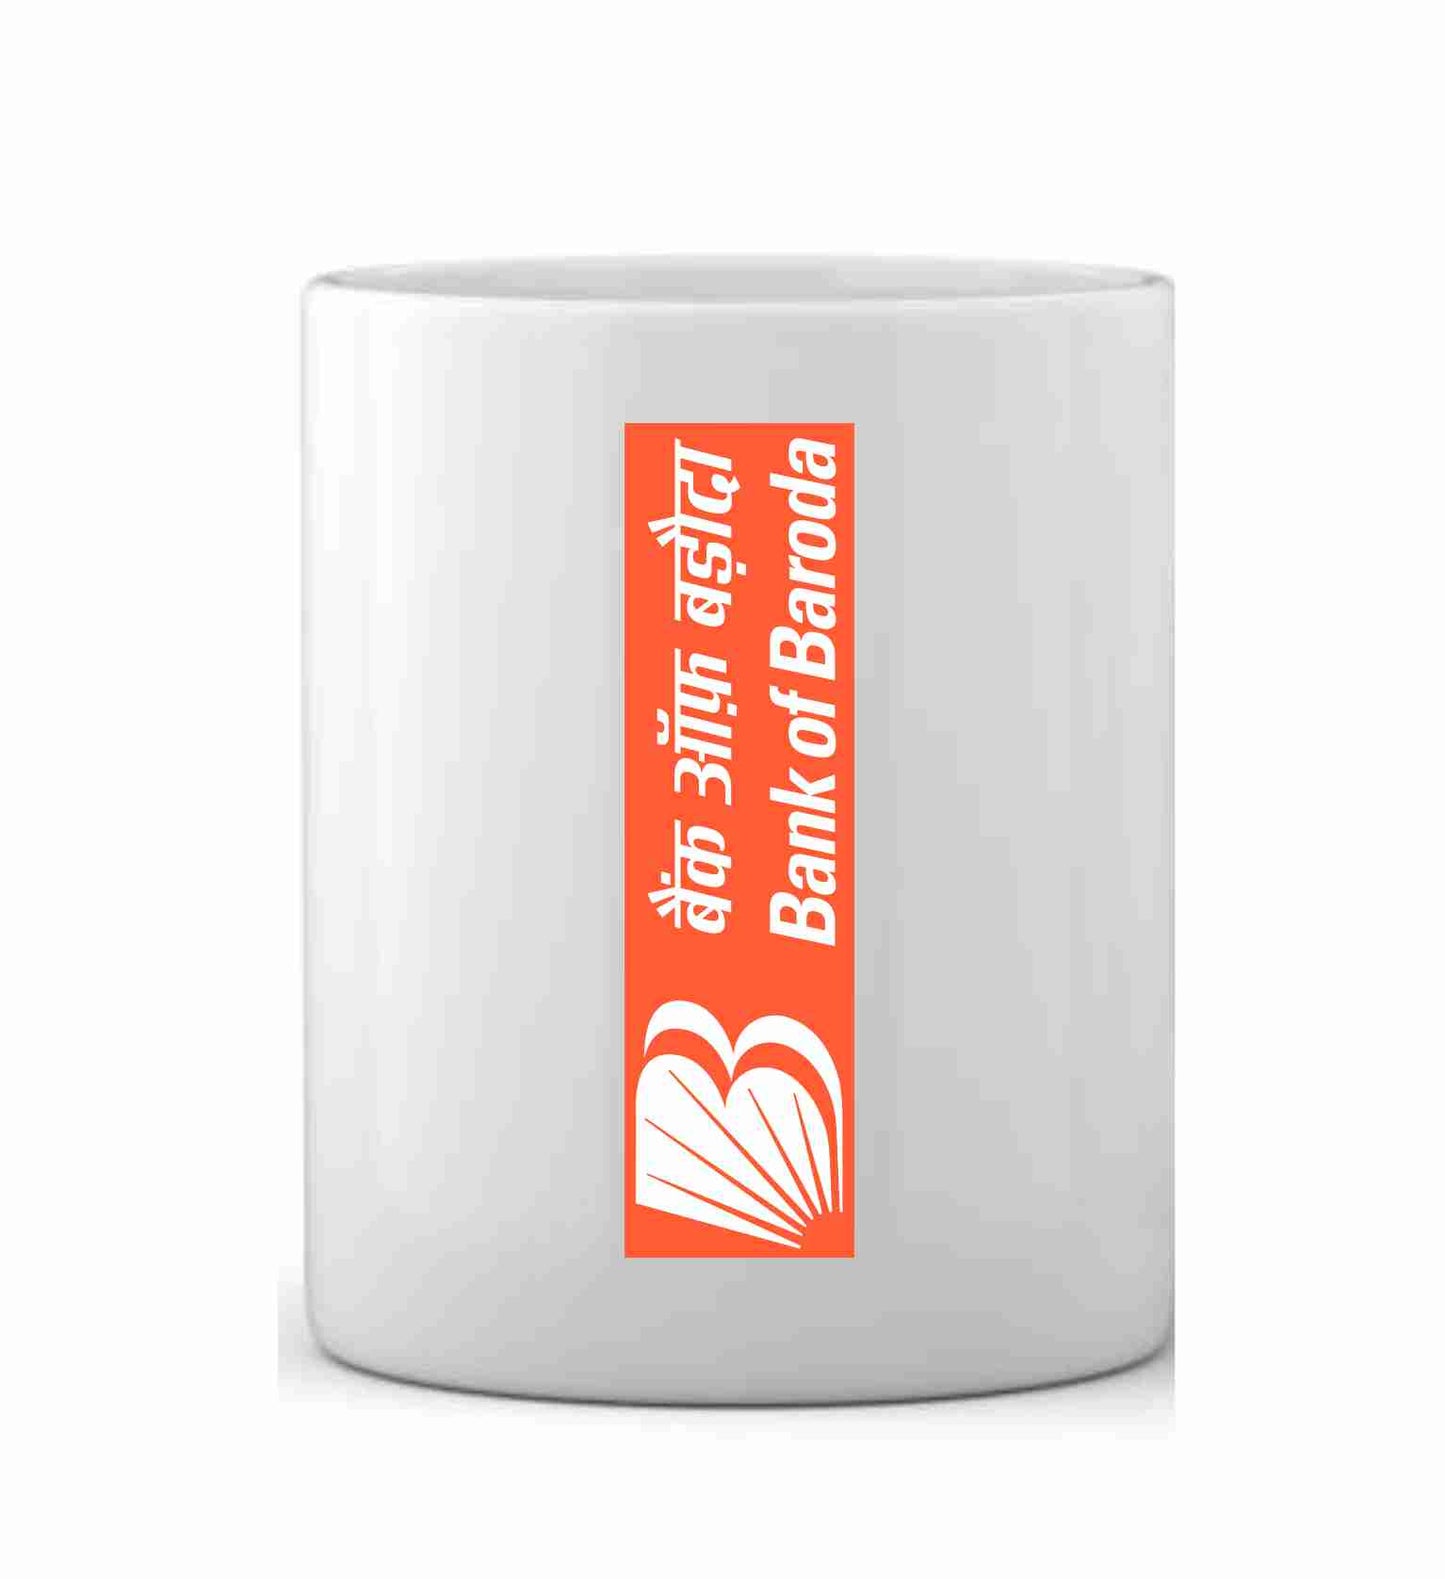 Proud to Be Part of Bank of Baroda Printed Mug White Tea Milk and Coffee Cup and Mug Made of Ceramic-11 oz (350ml) Ideal Office Souvenir and Gift Choice for Kids Friends Brother Sister Son Daughter